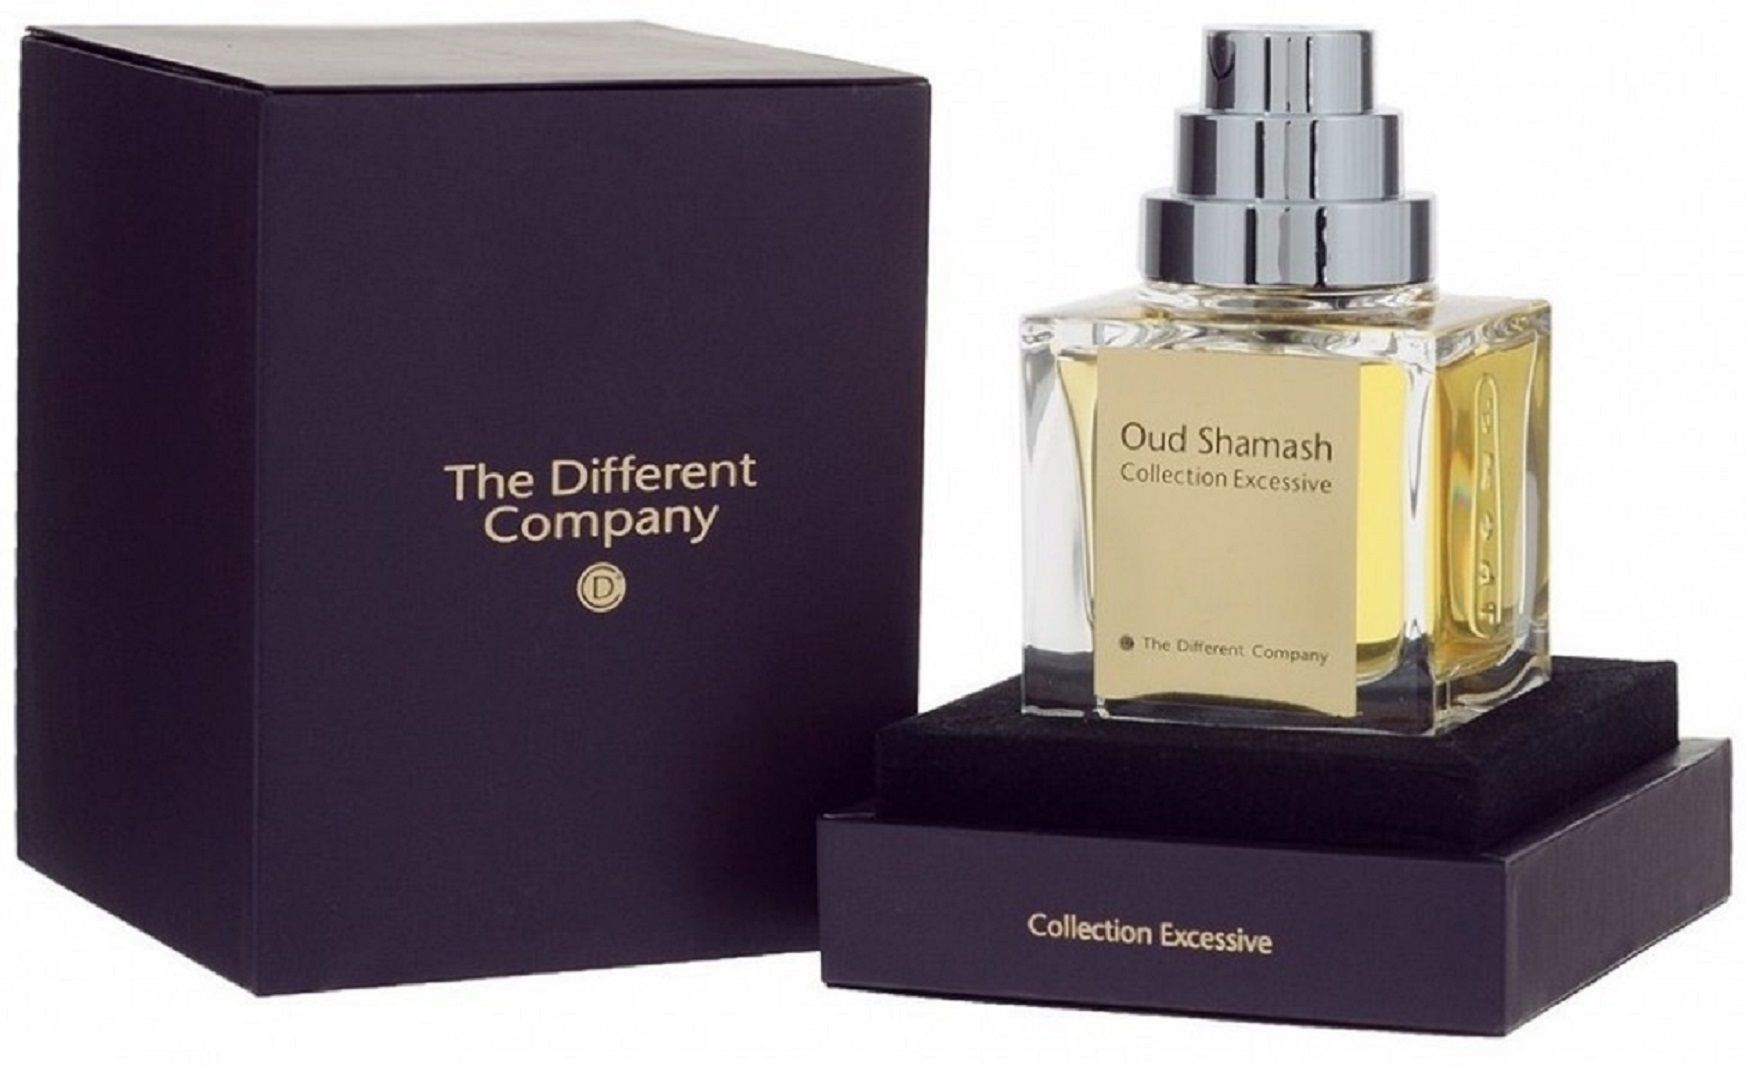 The Different Company Oud Shamash for women 50 ml EDP at Ratans Online Shop - Perfumes Wholesale and Retailer Fragrance